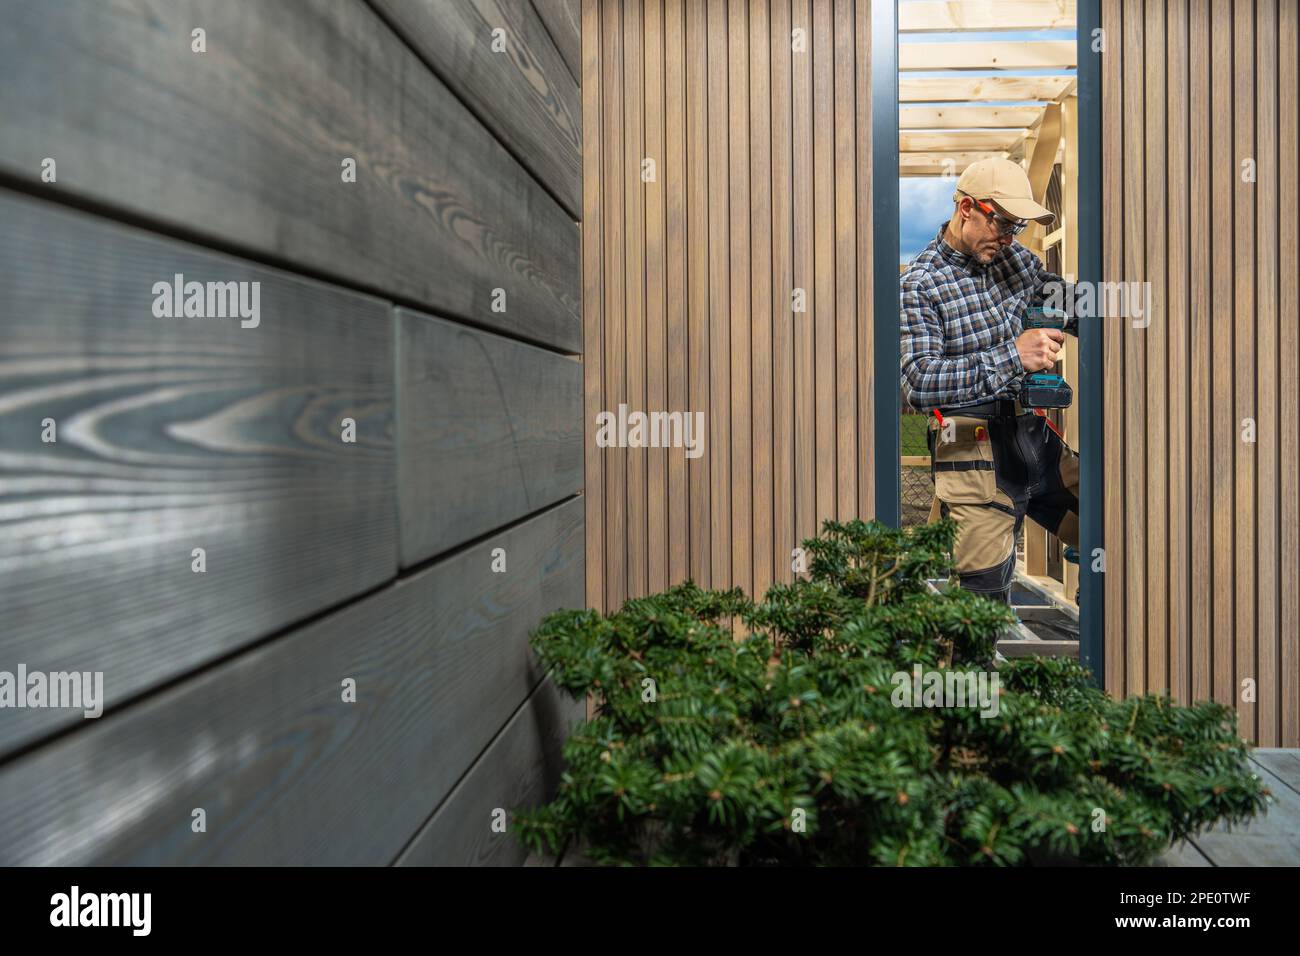 Modern Custom Garden Shed Building Performed by Caucasian Construction Worker in His 40s. Window Installing. Small Architecture Theme. Stock Photo